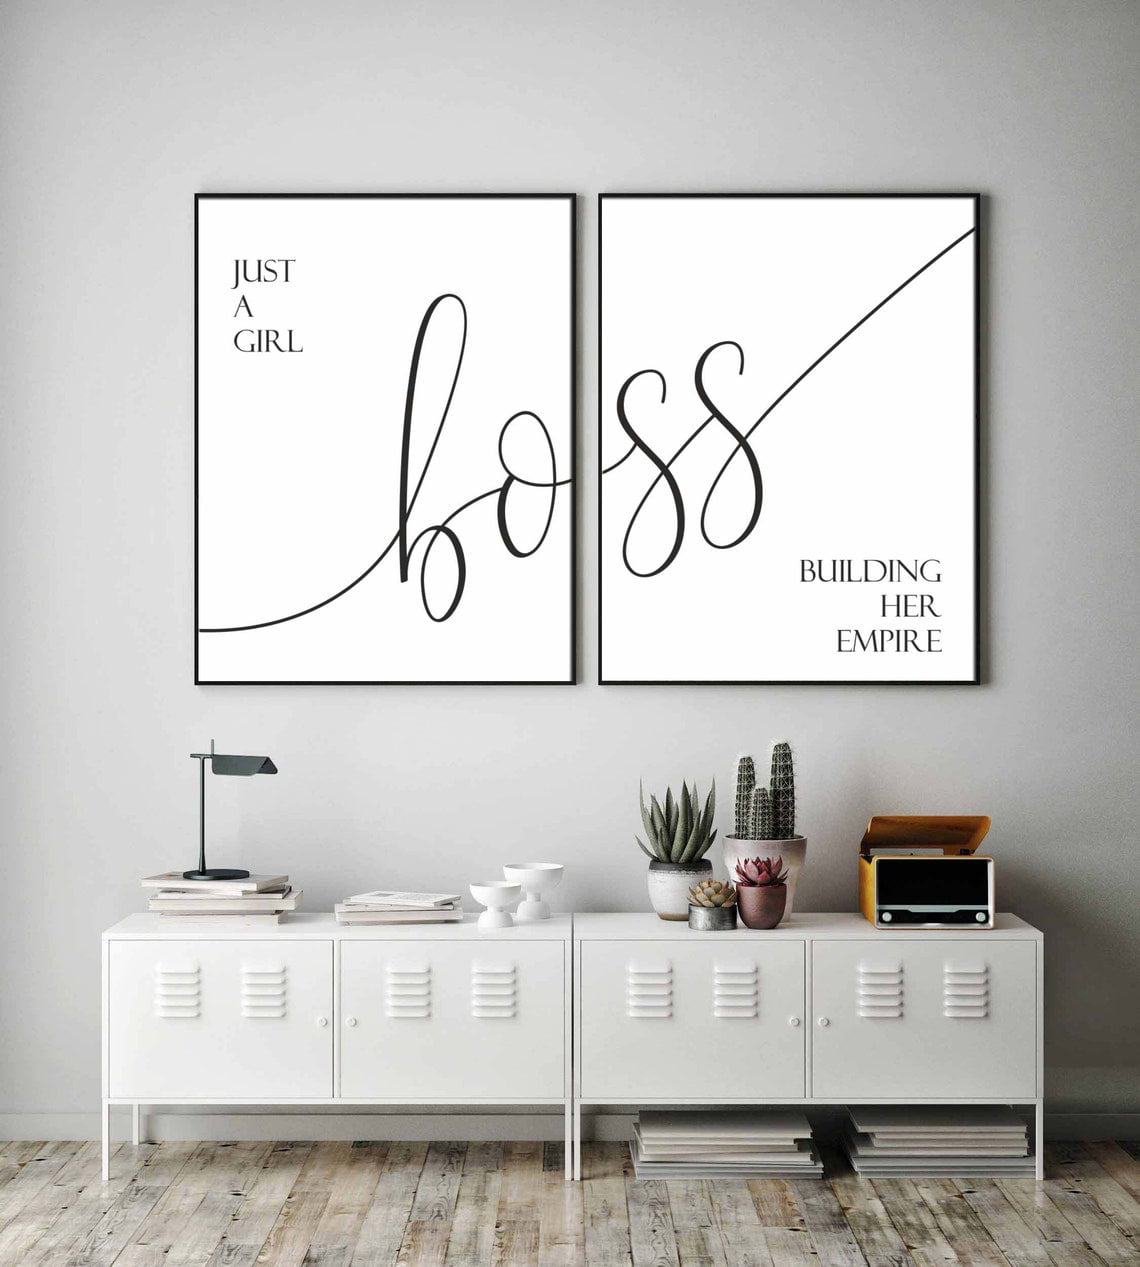 Set of 2 Canvas A Office For Decor Office Painting Building Poster for Her Girl Lady Boss Wall New Boss Gift Art Just Empire Prints Unframed